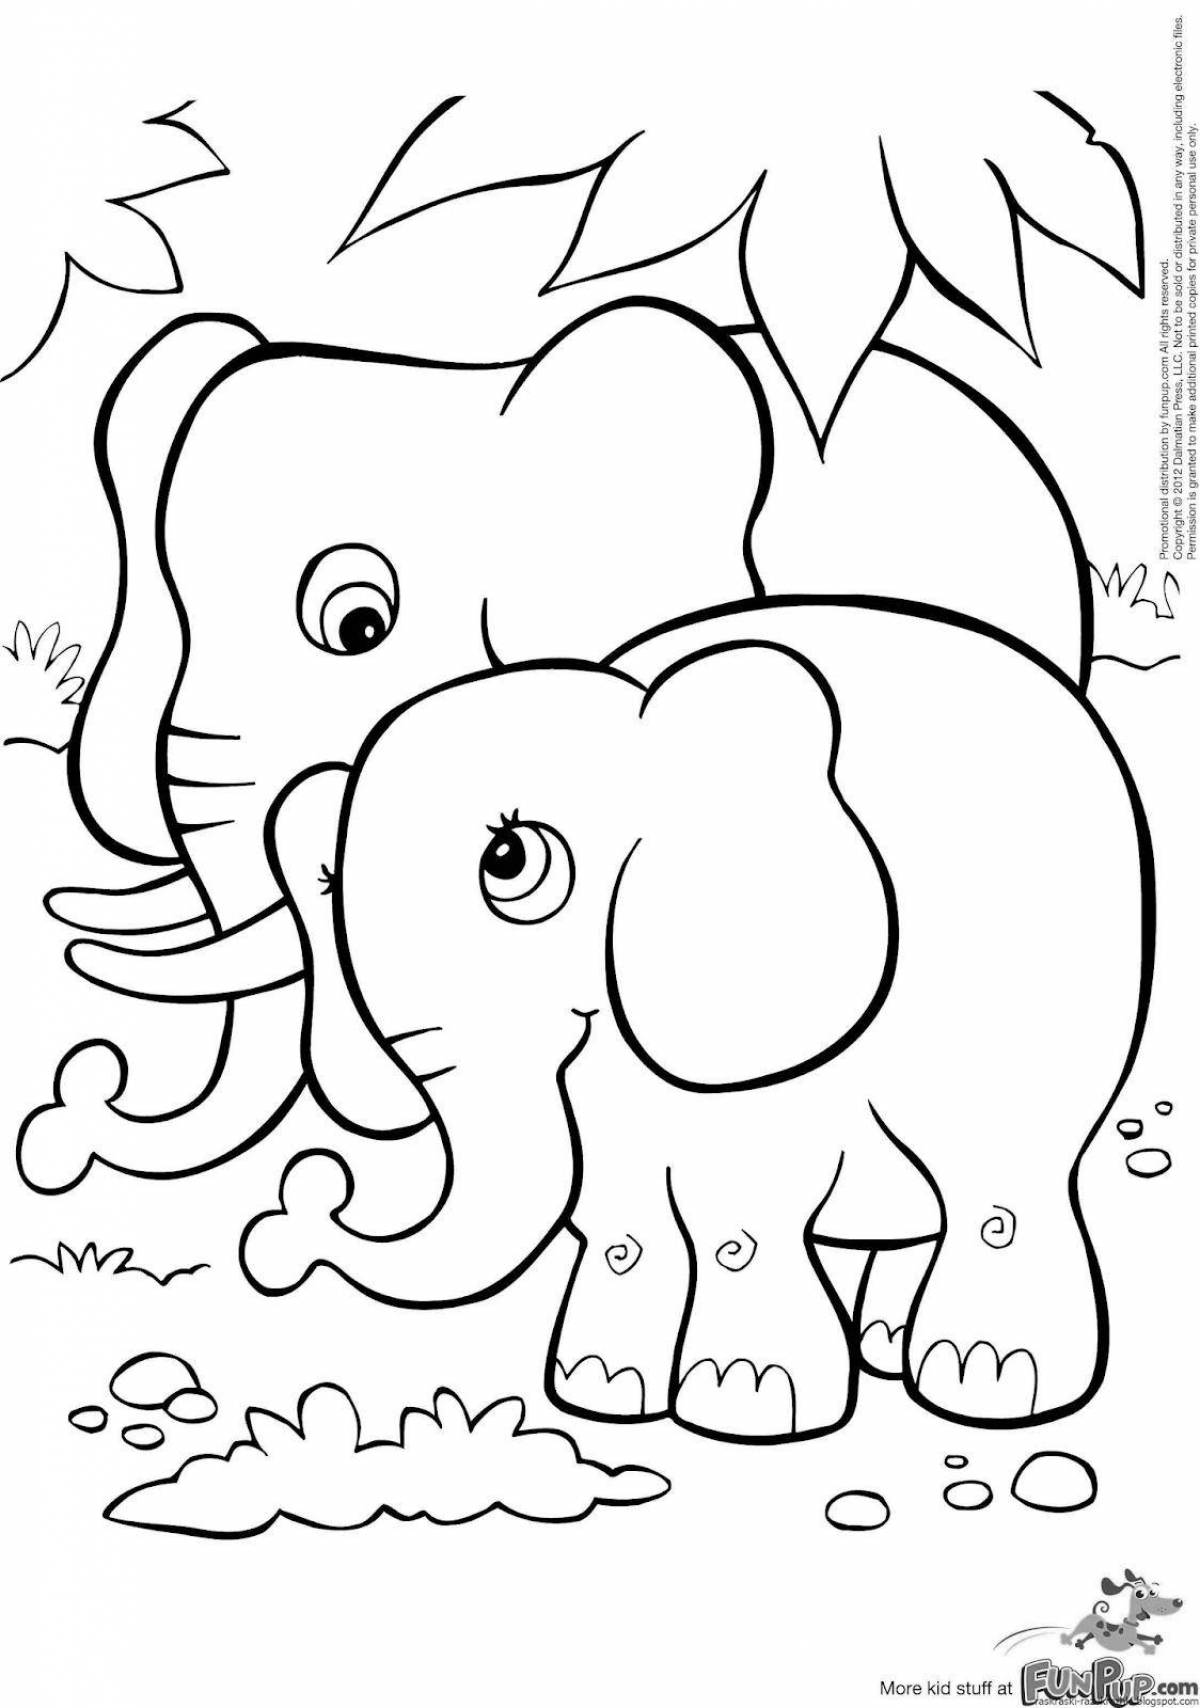 Adorable elephant coloring page